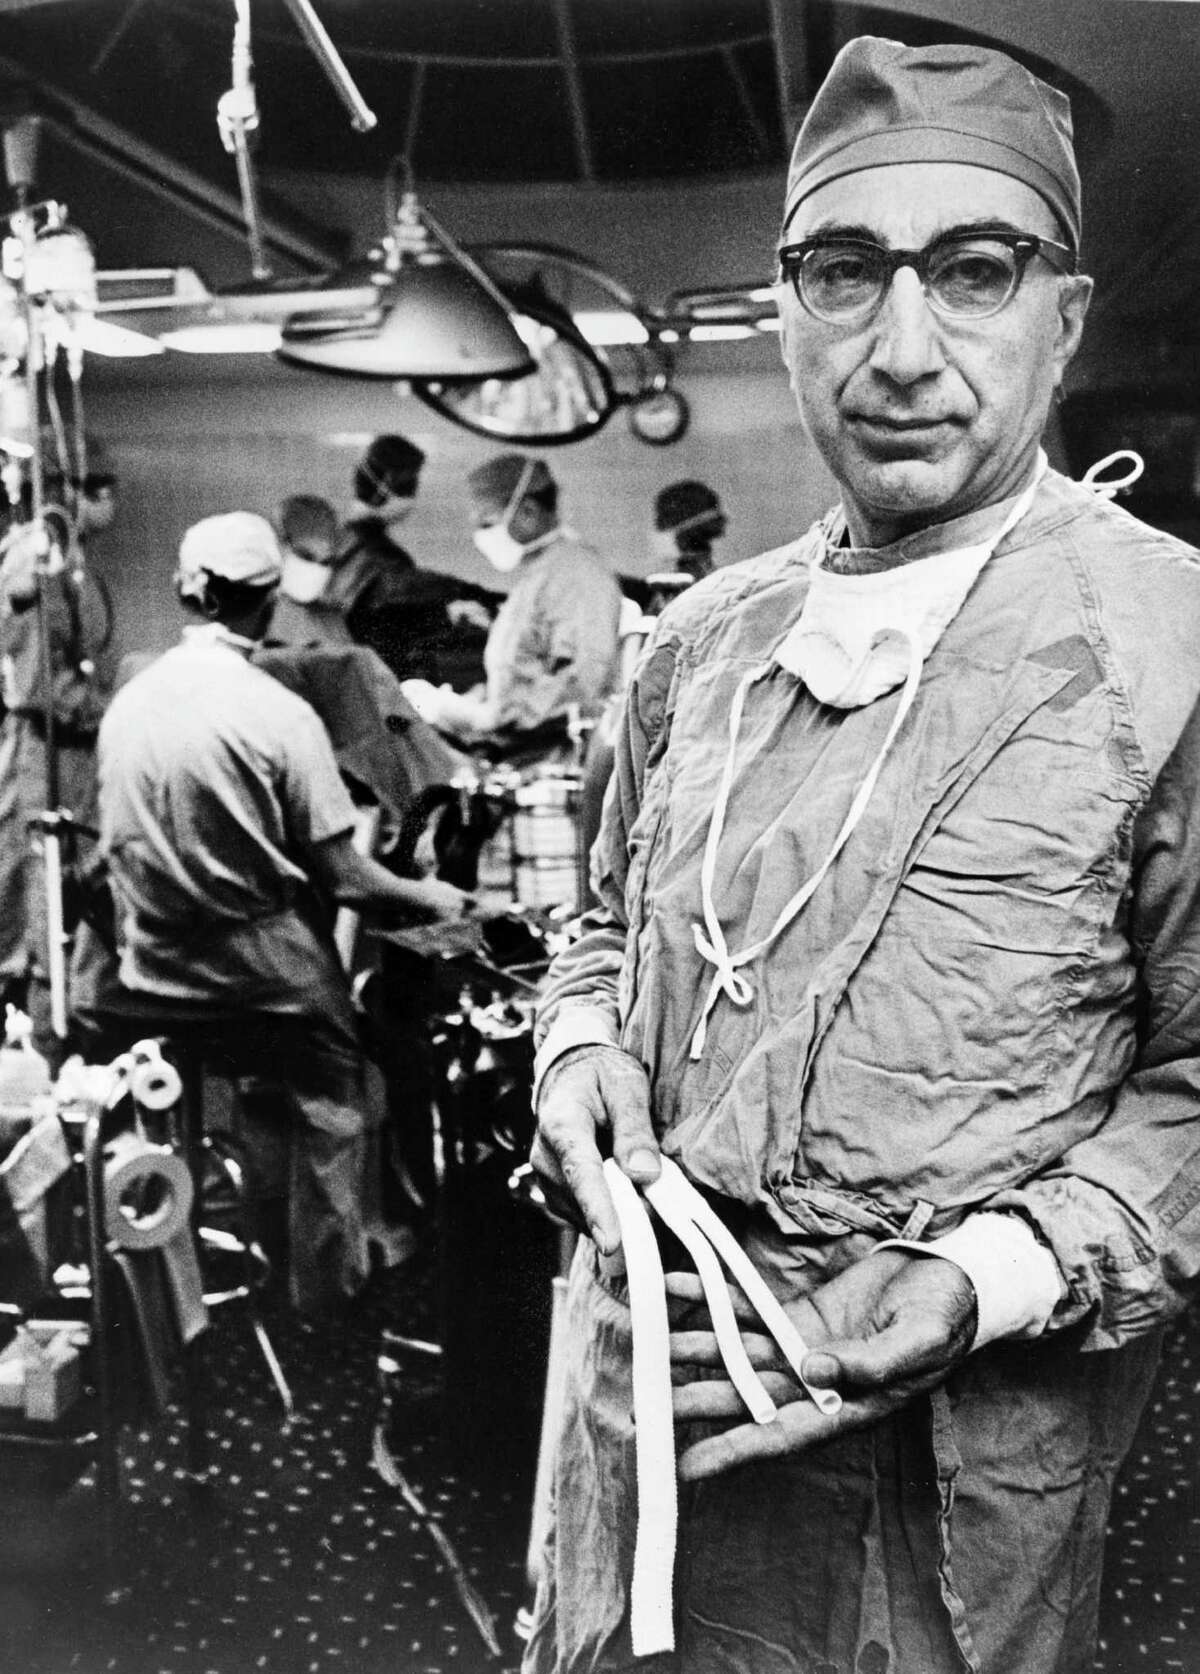 The gift of graft Baylor College of Medicine is credited with inventing the Dacron graft, which usually replaces or repairs blood vessels. Houston's Dr. Michael Ellis DeBakey was the first U.S. surgeon to remove an aneurysm in the aorta near the stomach.Here, Dr. DeBakey holds arterial grafts in 1966, fabricated from knitted Dacron tubing which have proven to be, in this gifted surgeon's hands, a lifesaving device for hundreds of his patients. 